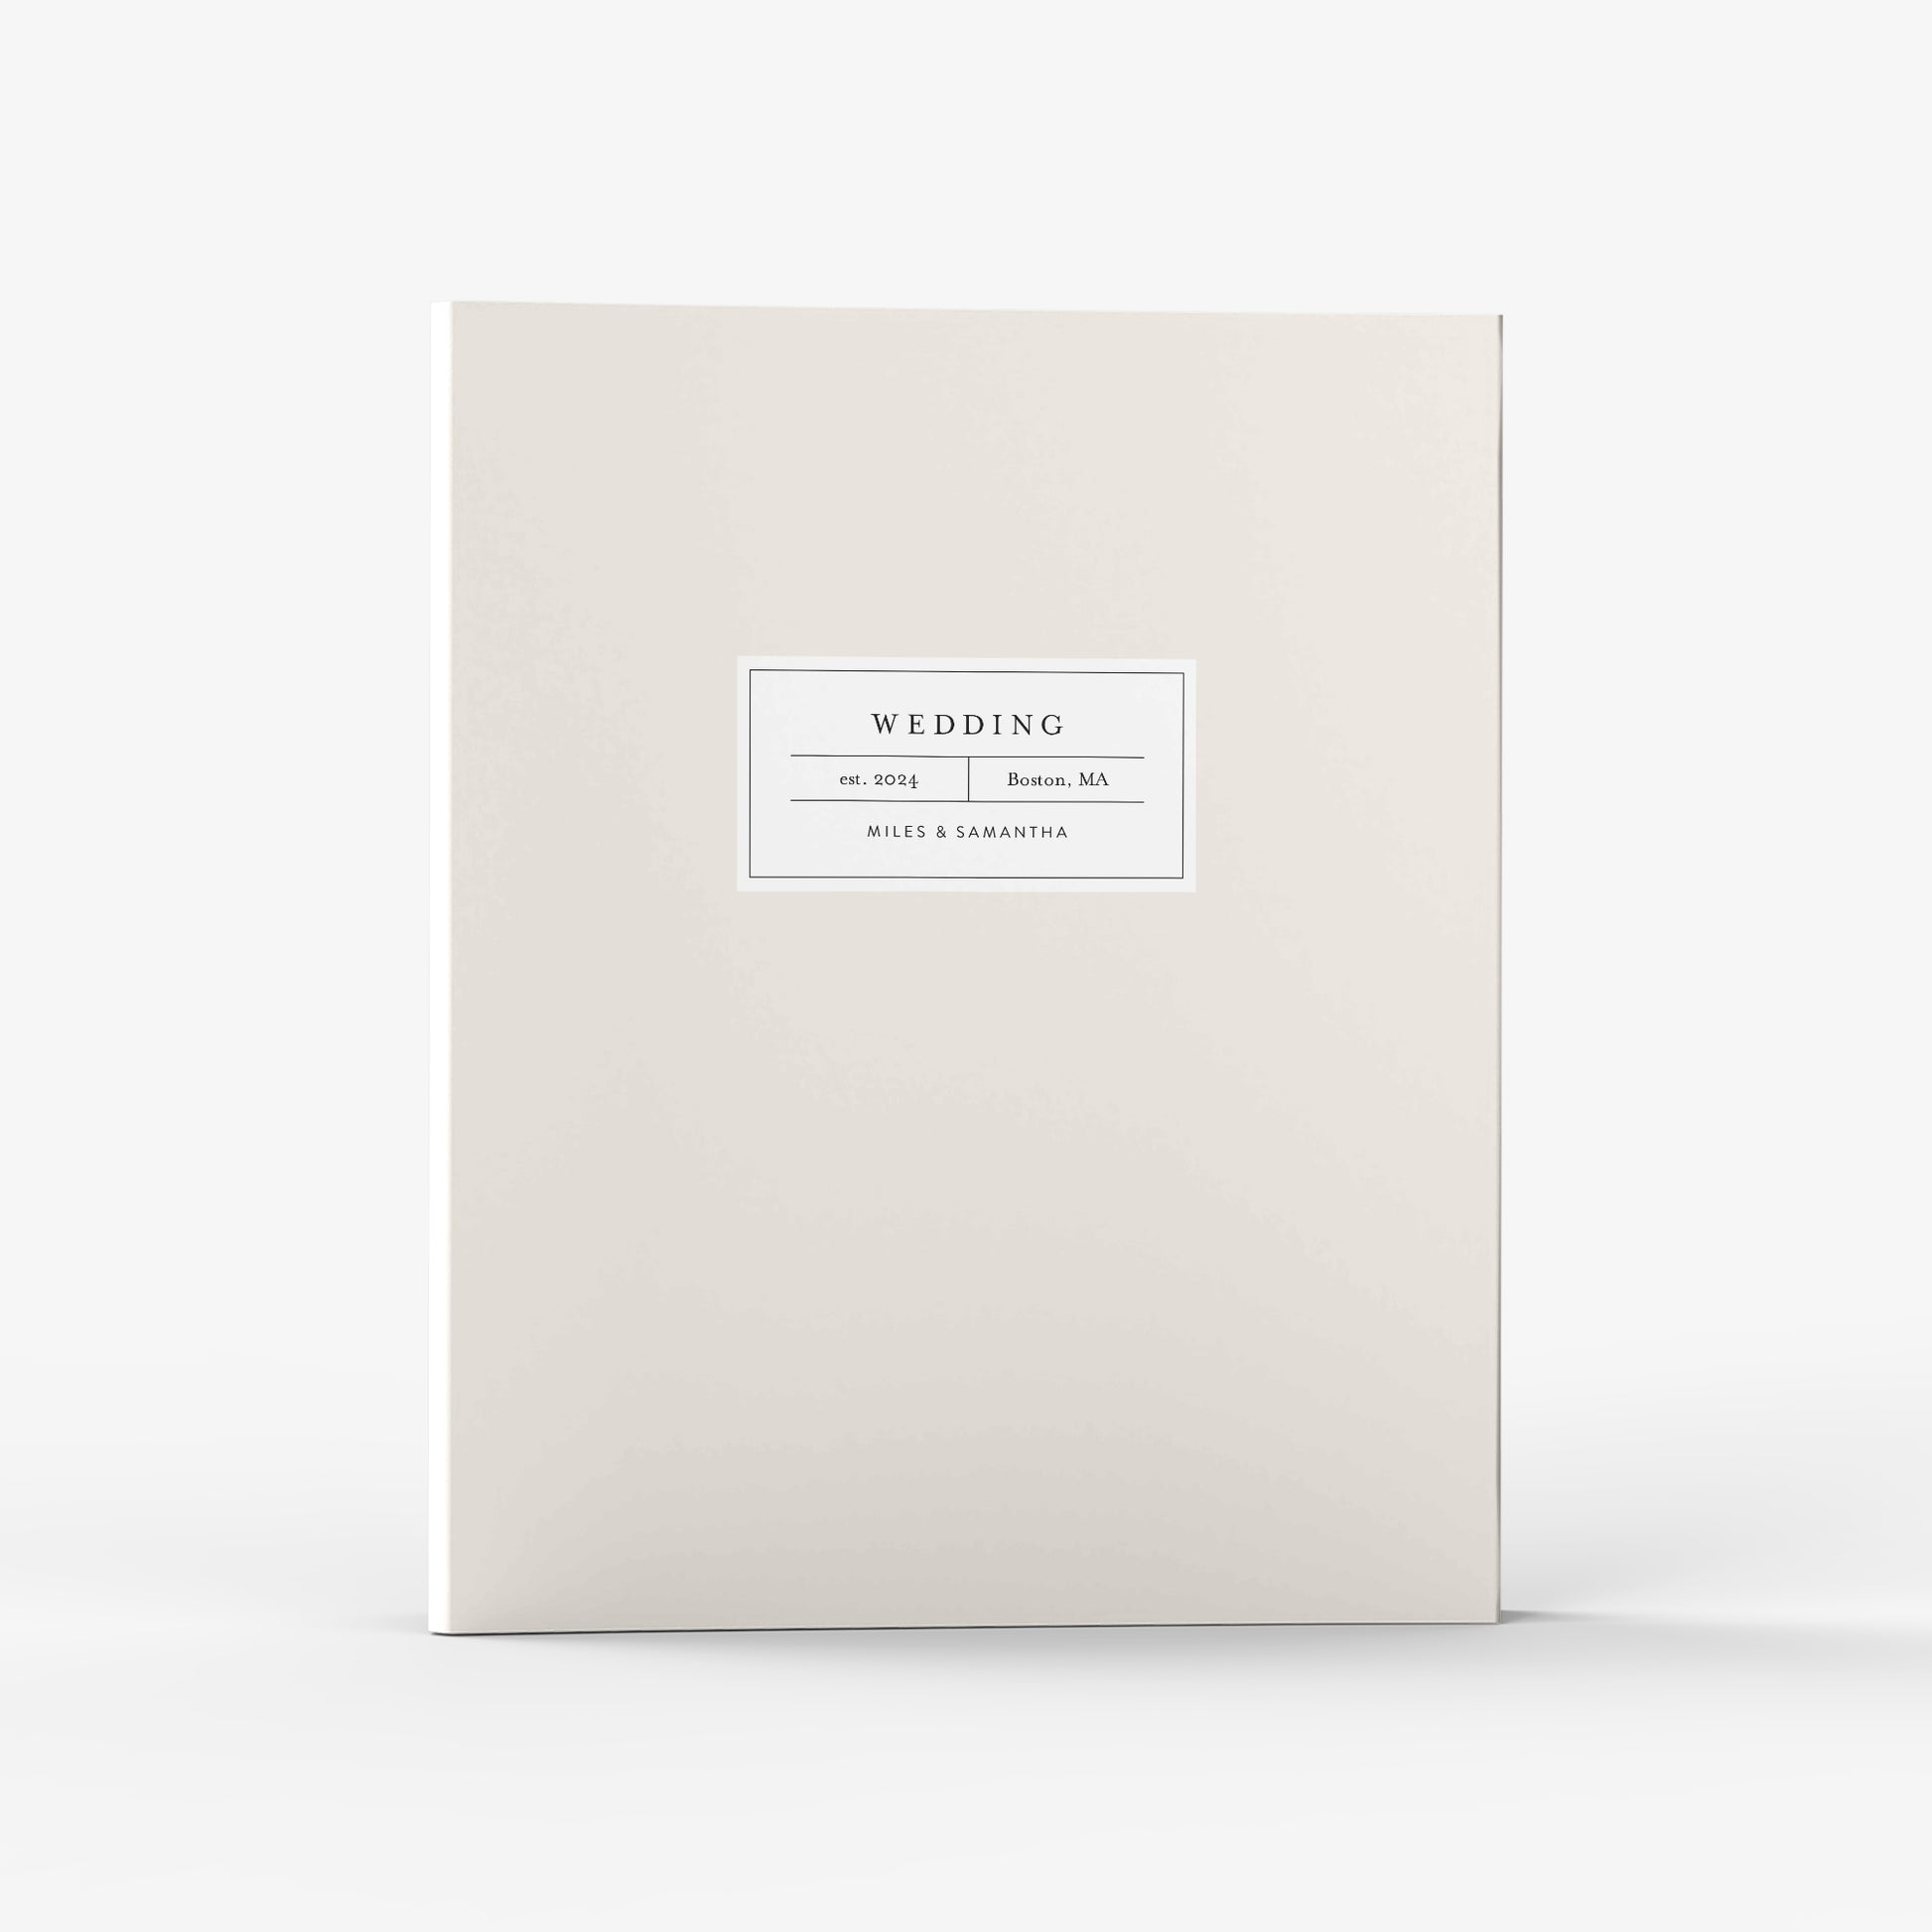 Our wedding binders are the perfect planning tool, shown in a modern apothecary label design